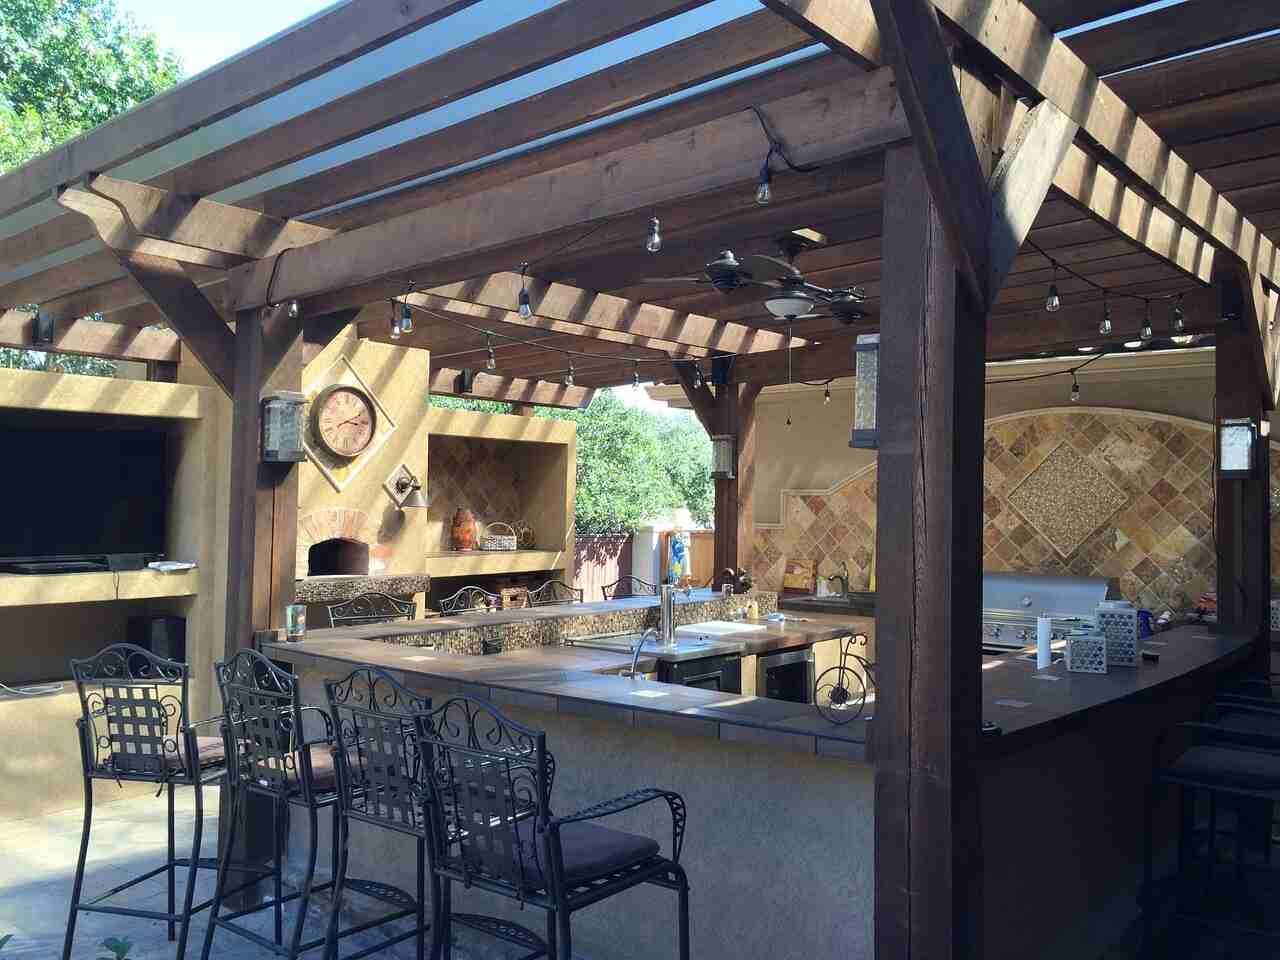 The outdoor kitchen and waterfalls A sneak peek